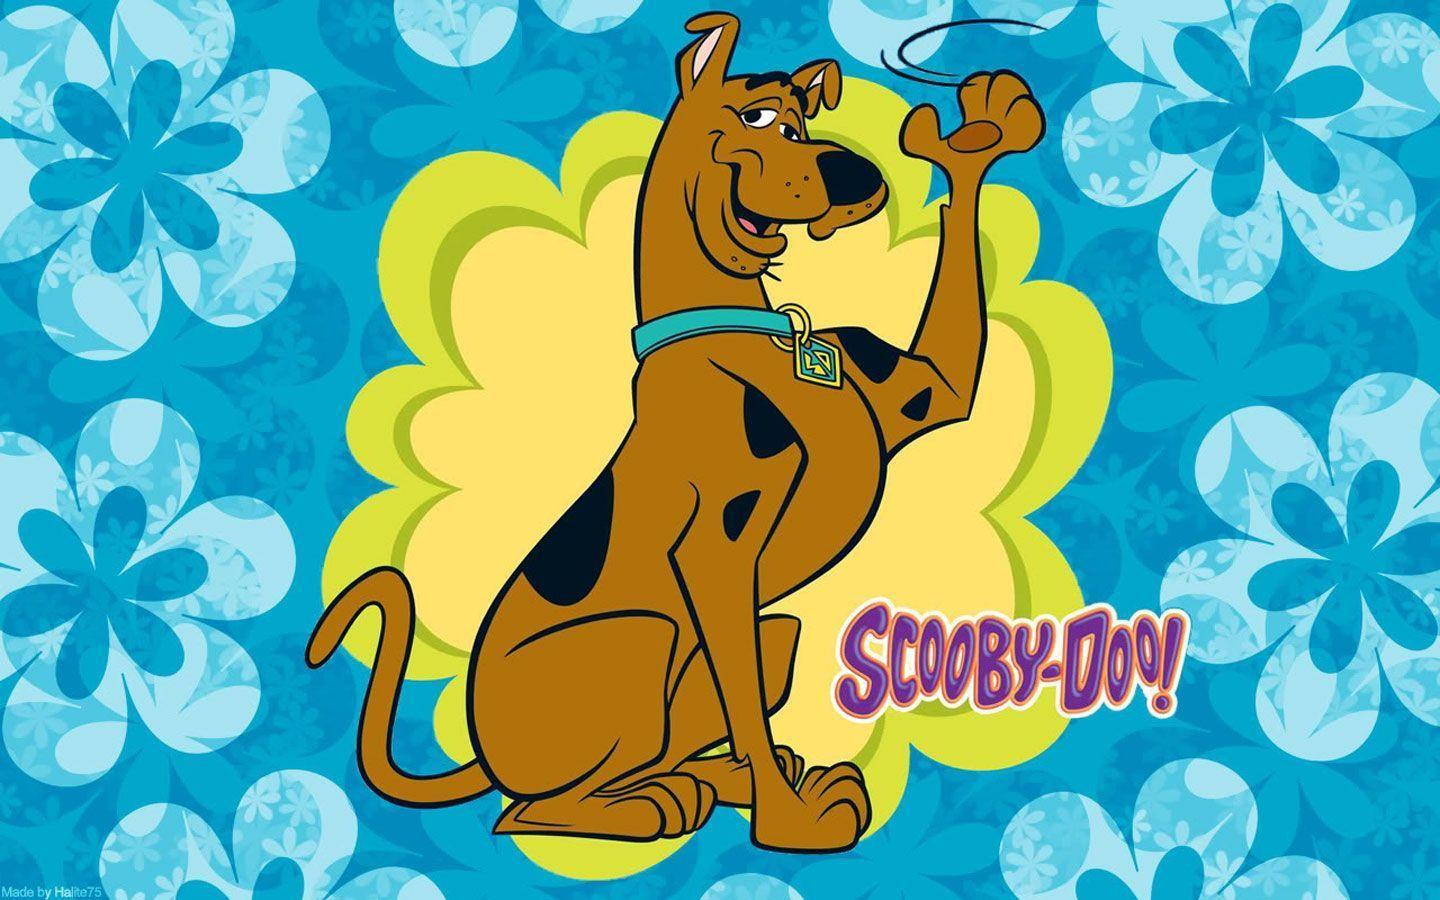 Scooby Doo HD Wallpaper for Android